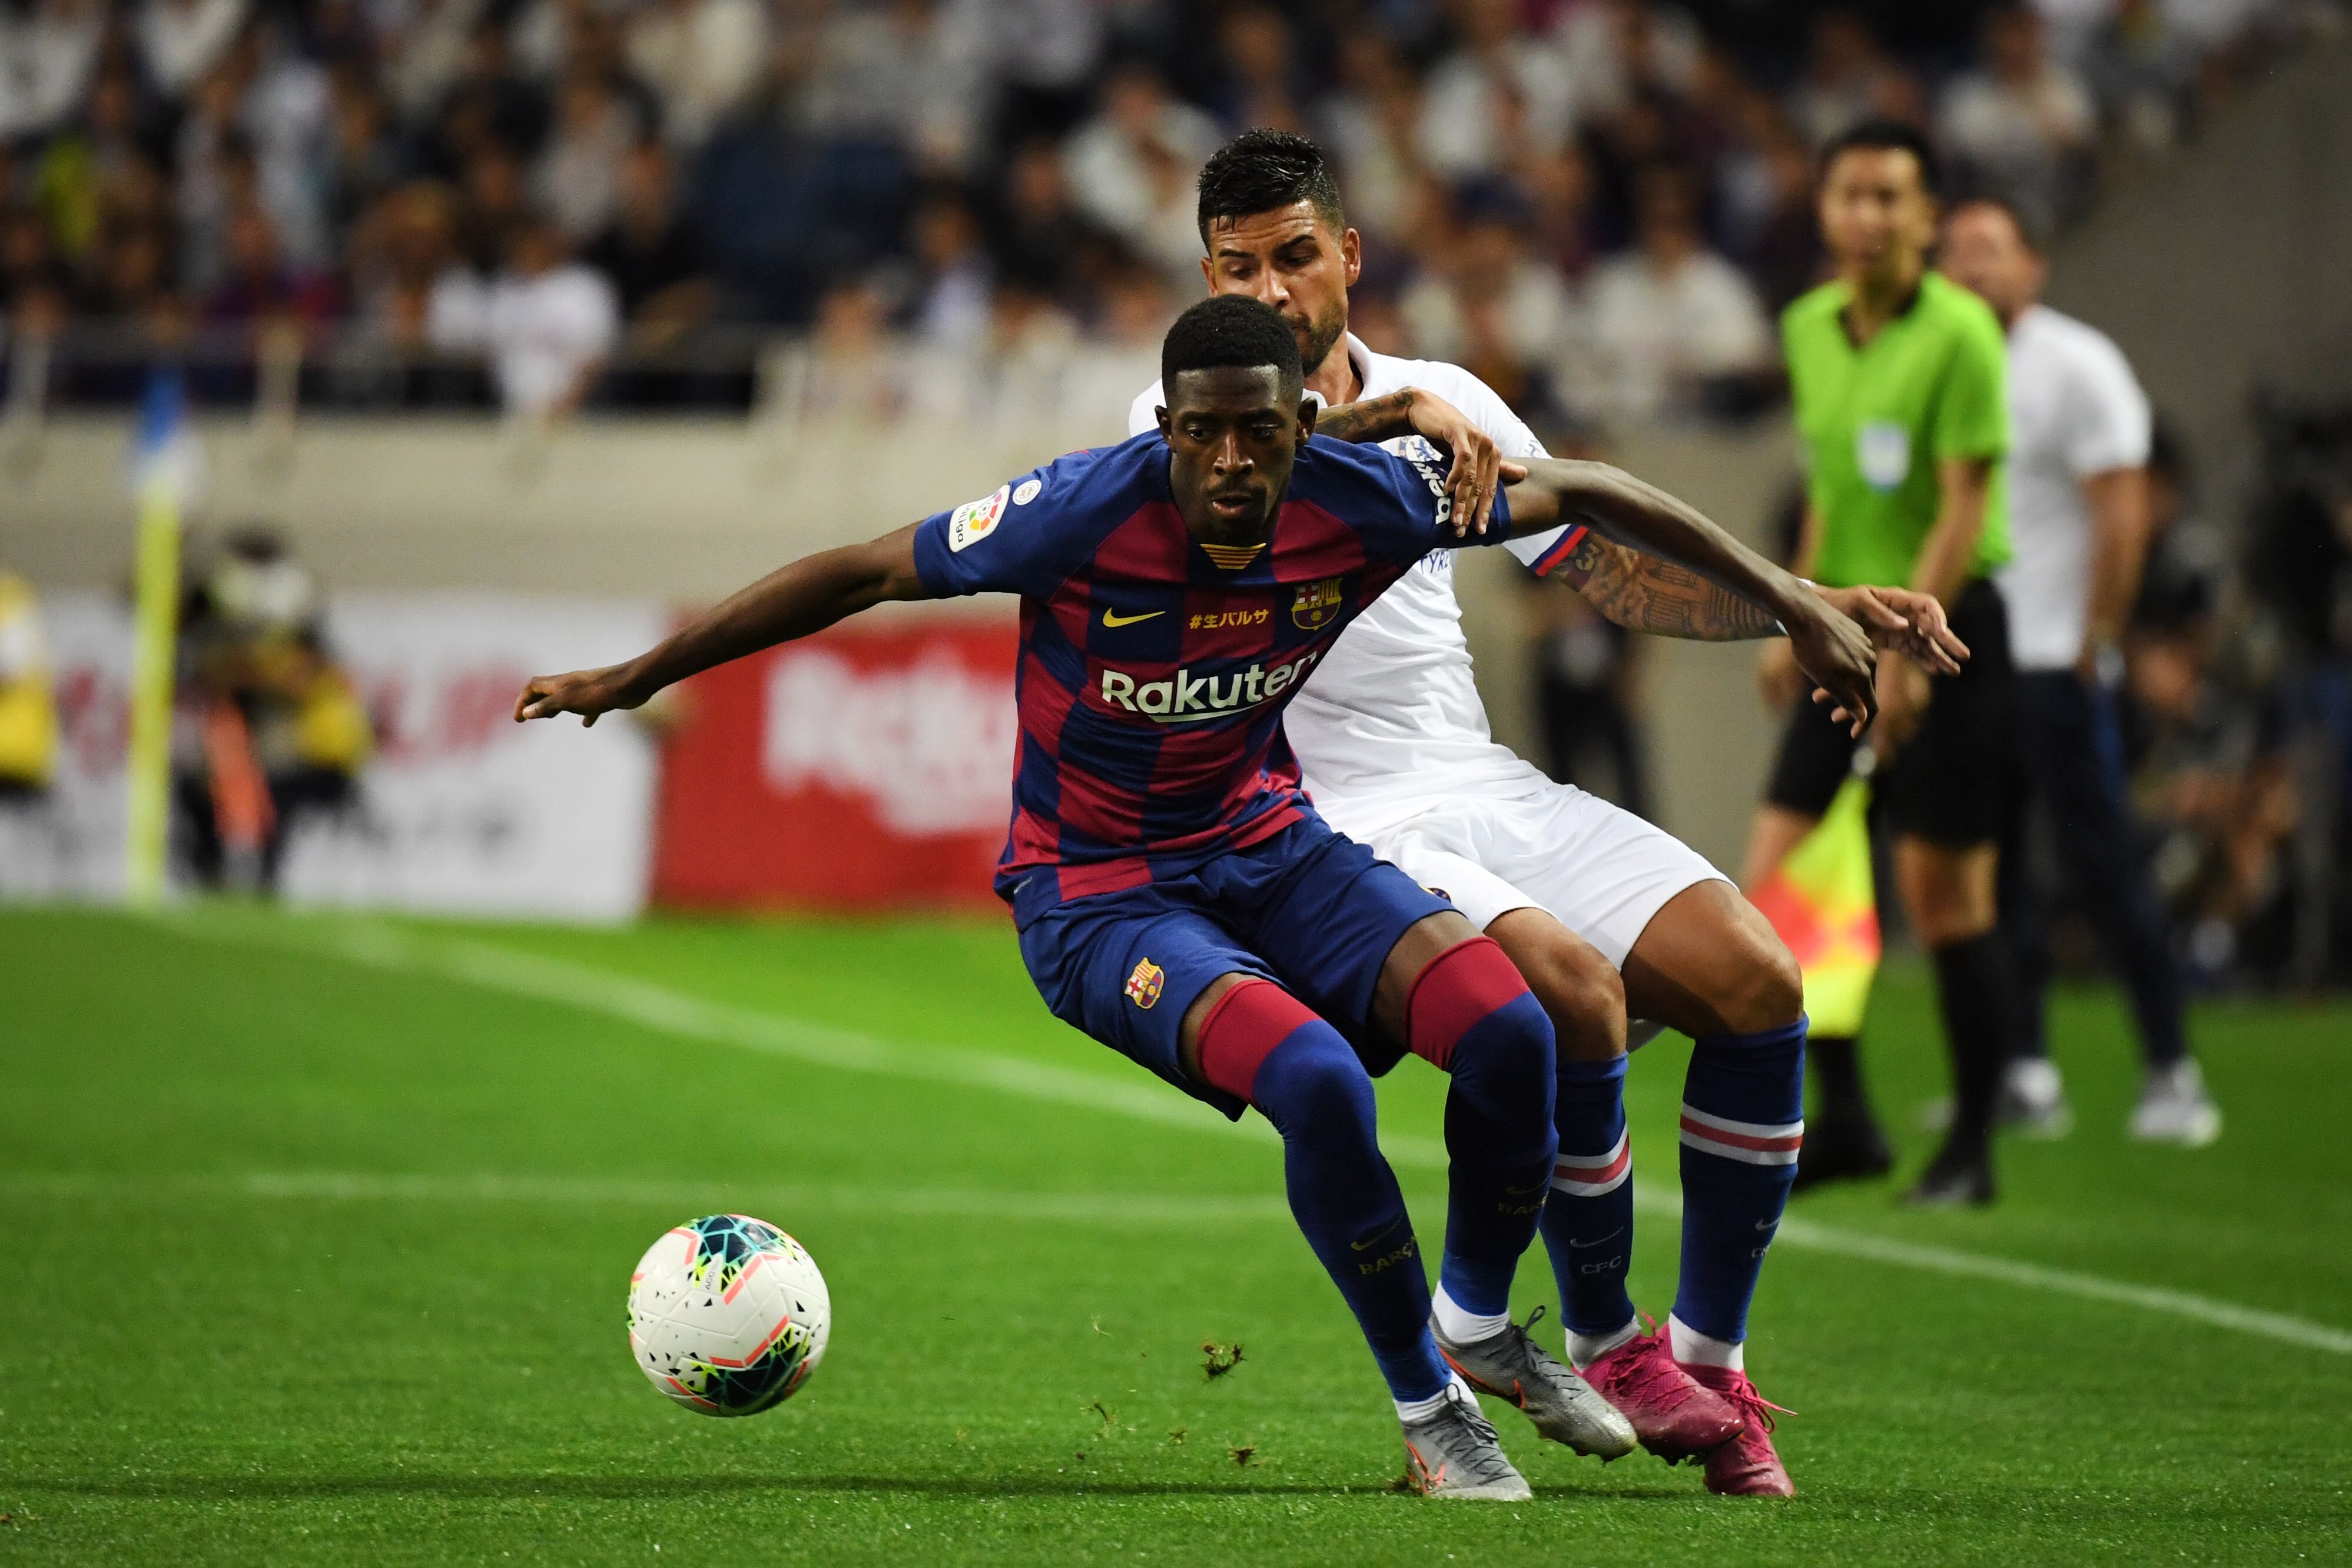 Does Dembele have a future at Barcelona? (Photo by TOSHIFUMI KITAMURA/AFP/Getty Images)